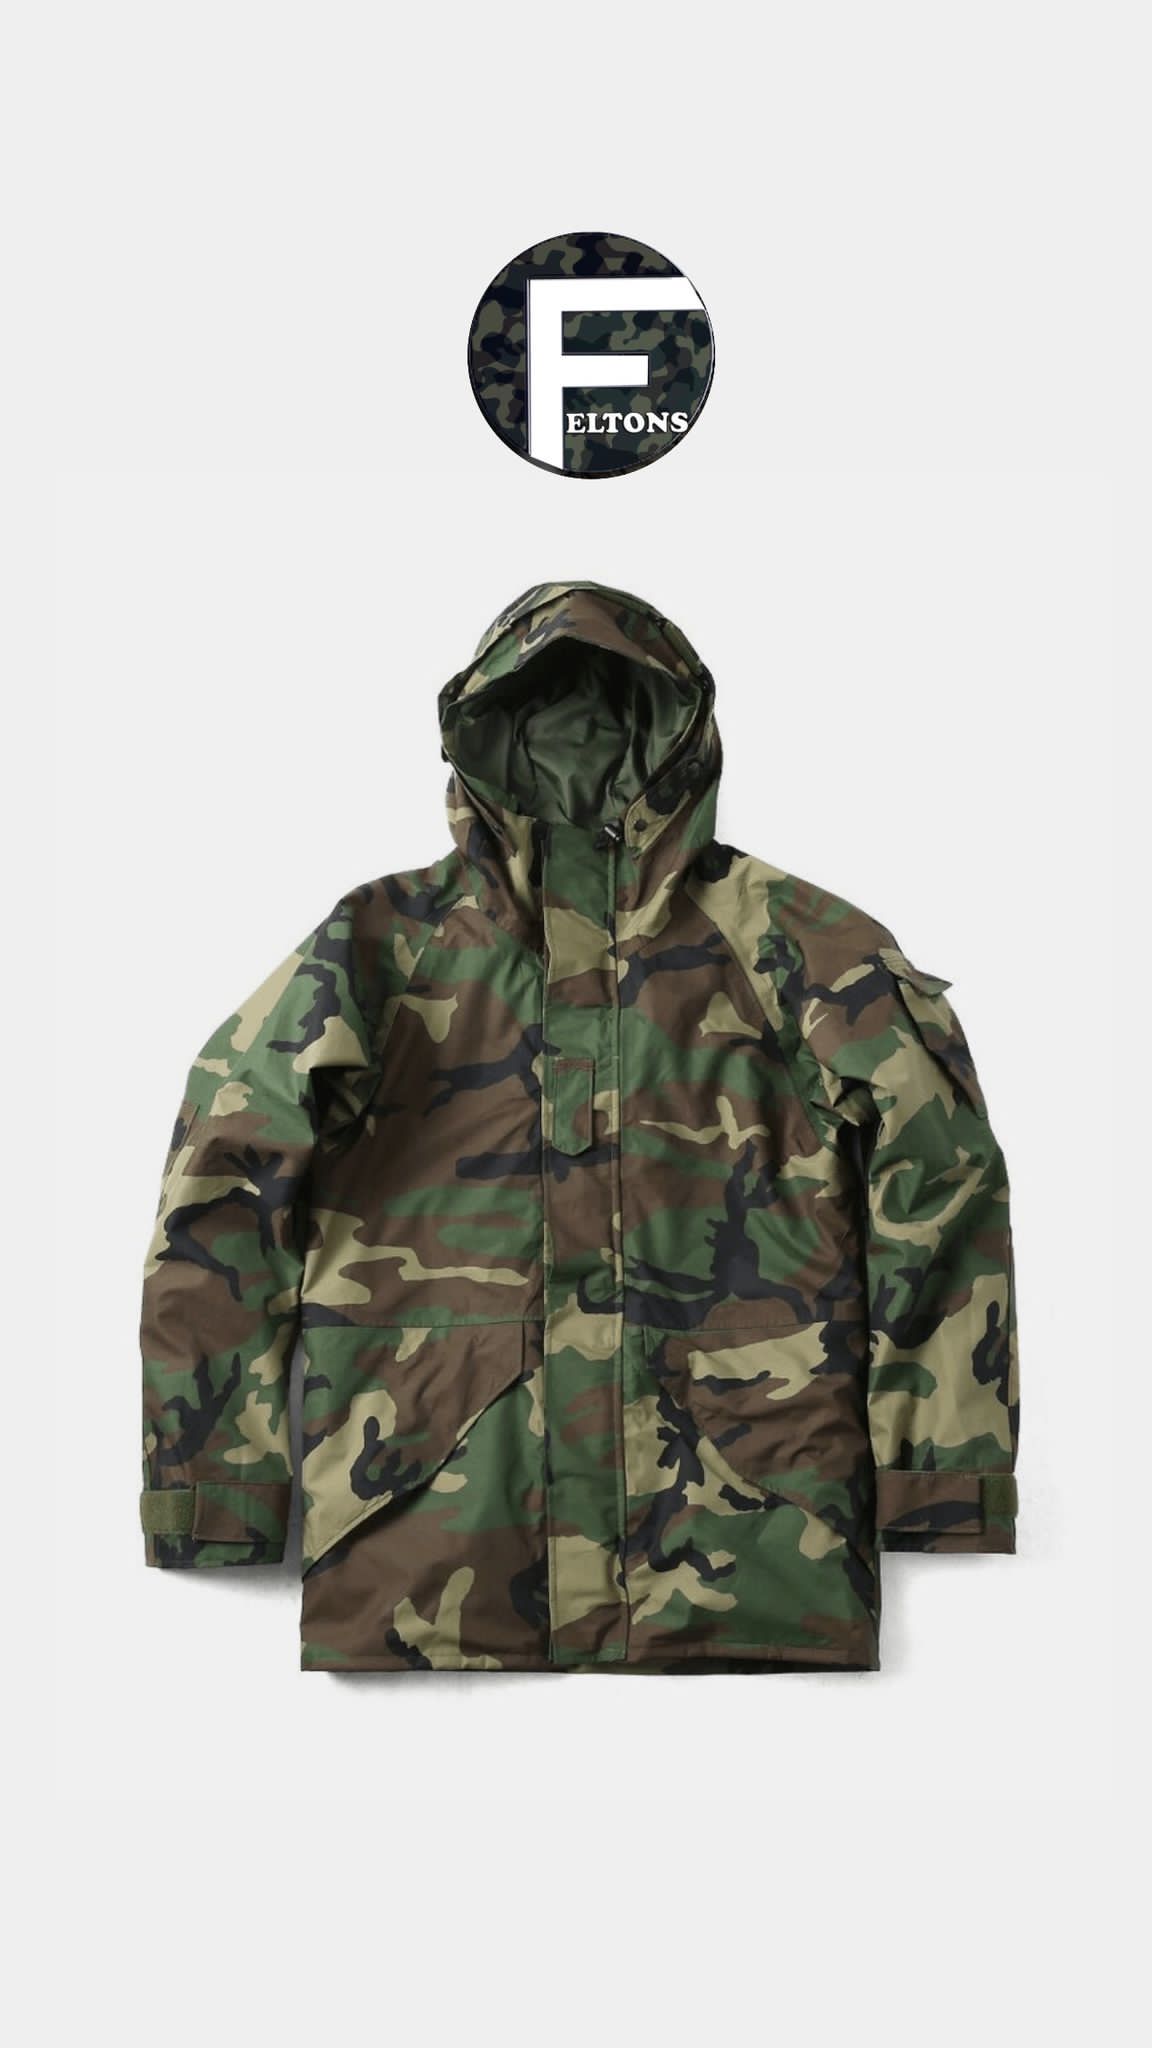 "US Woodland Camo Goretex Jackets Genuine U.S. Military Issue ECW Cold weather Breathable Waterproof Gore-tex Parka